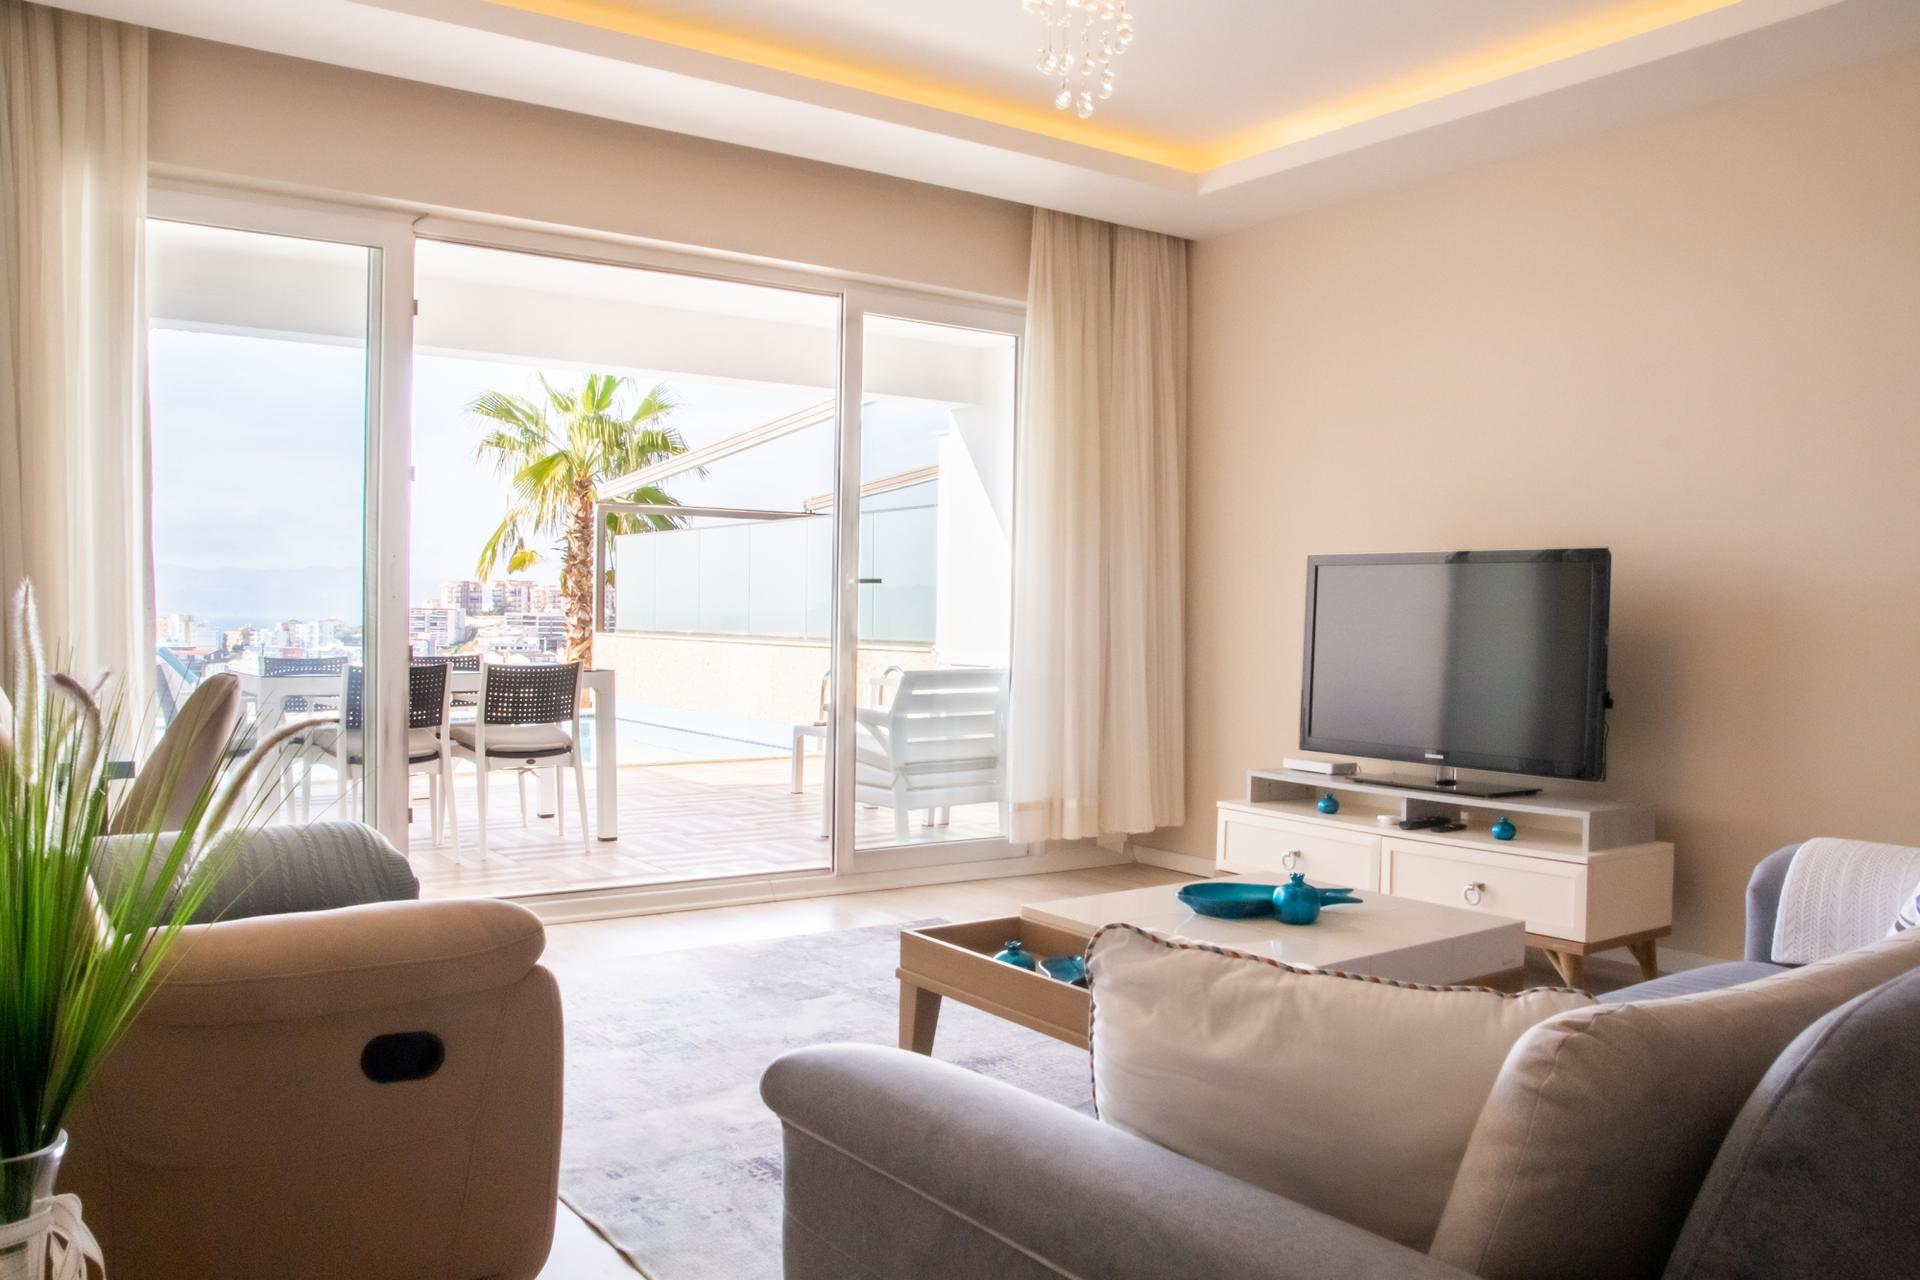 Let’s look at the living room, where you can access a private pool directly. 